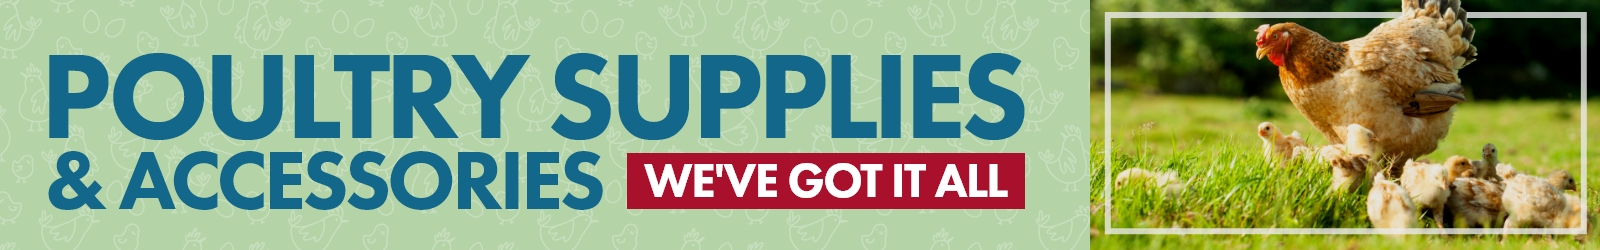 Shop now for chicks, poultry supplies & accessories. We've got it all!